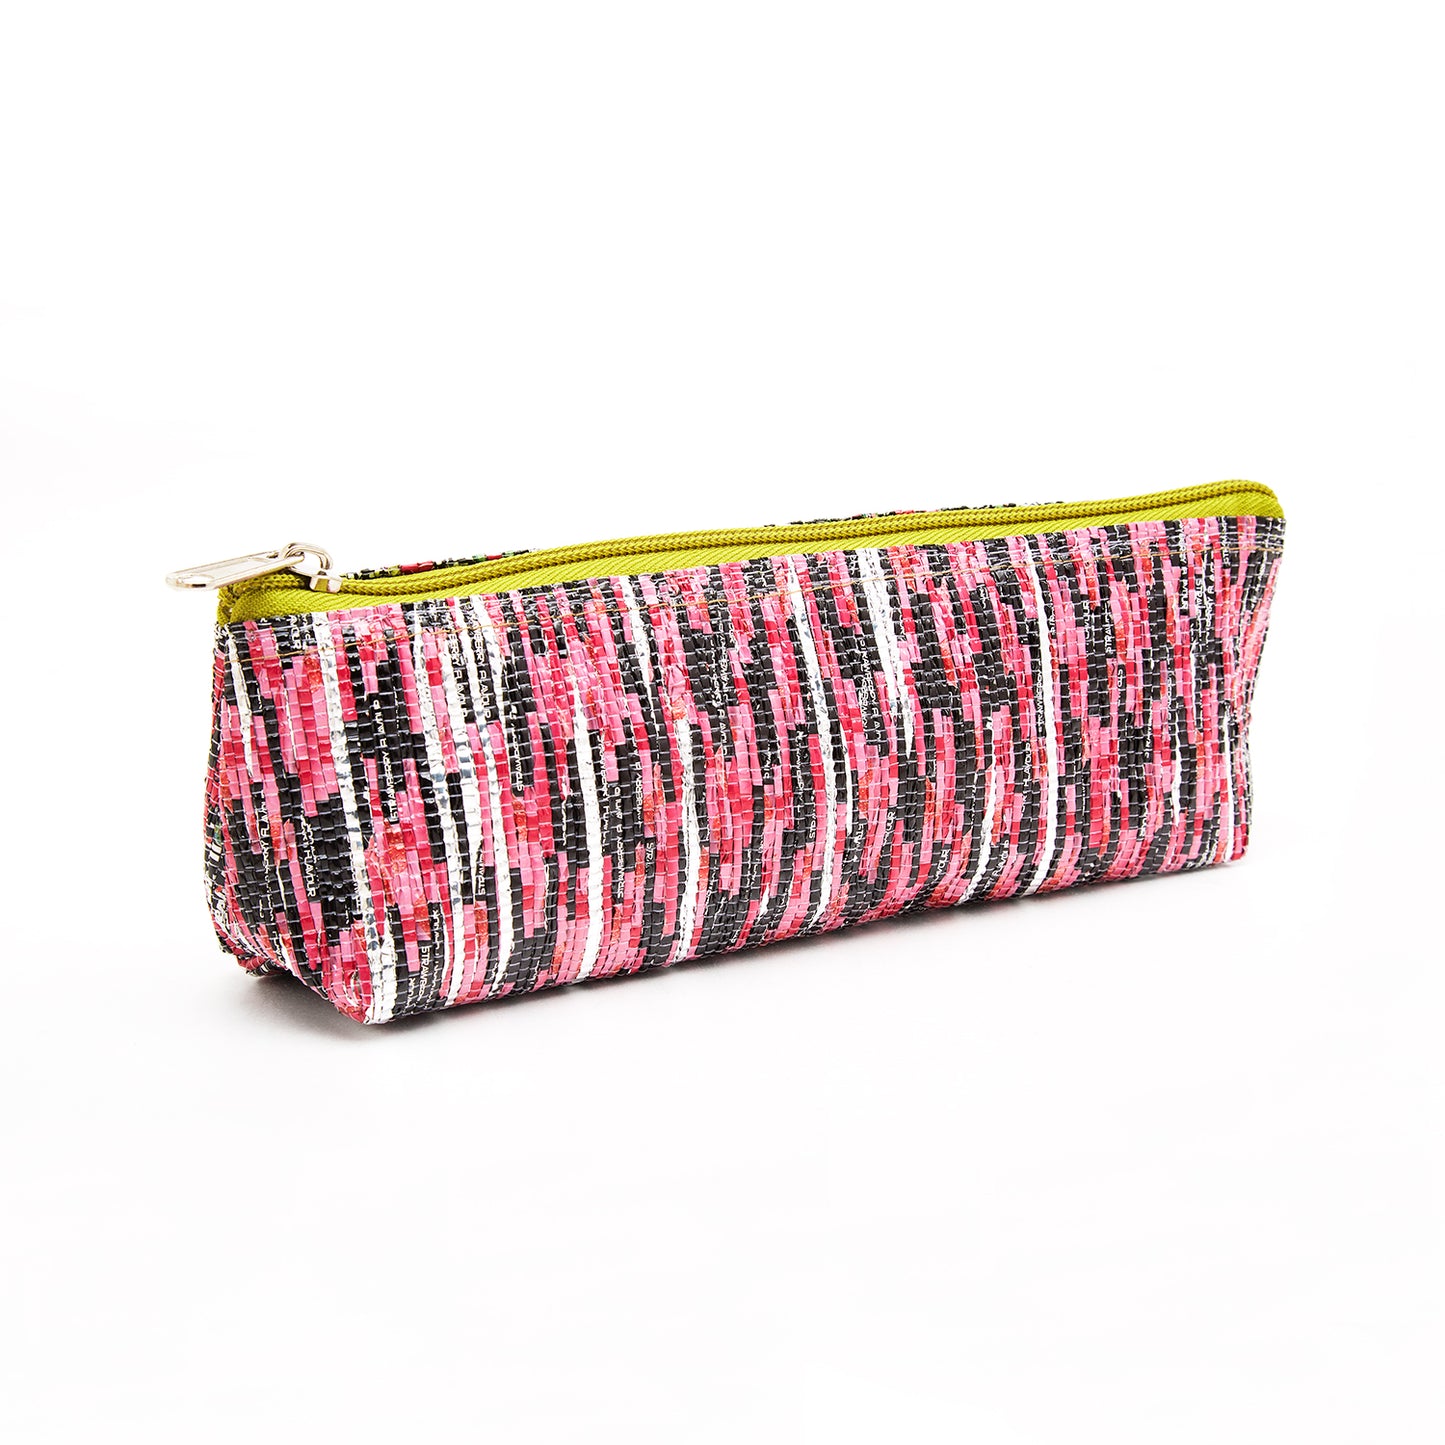 Pink, Black & Silver Recycled Plastic Pencil Pouch (MLP Plastic)